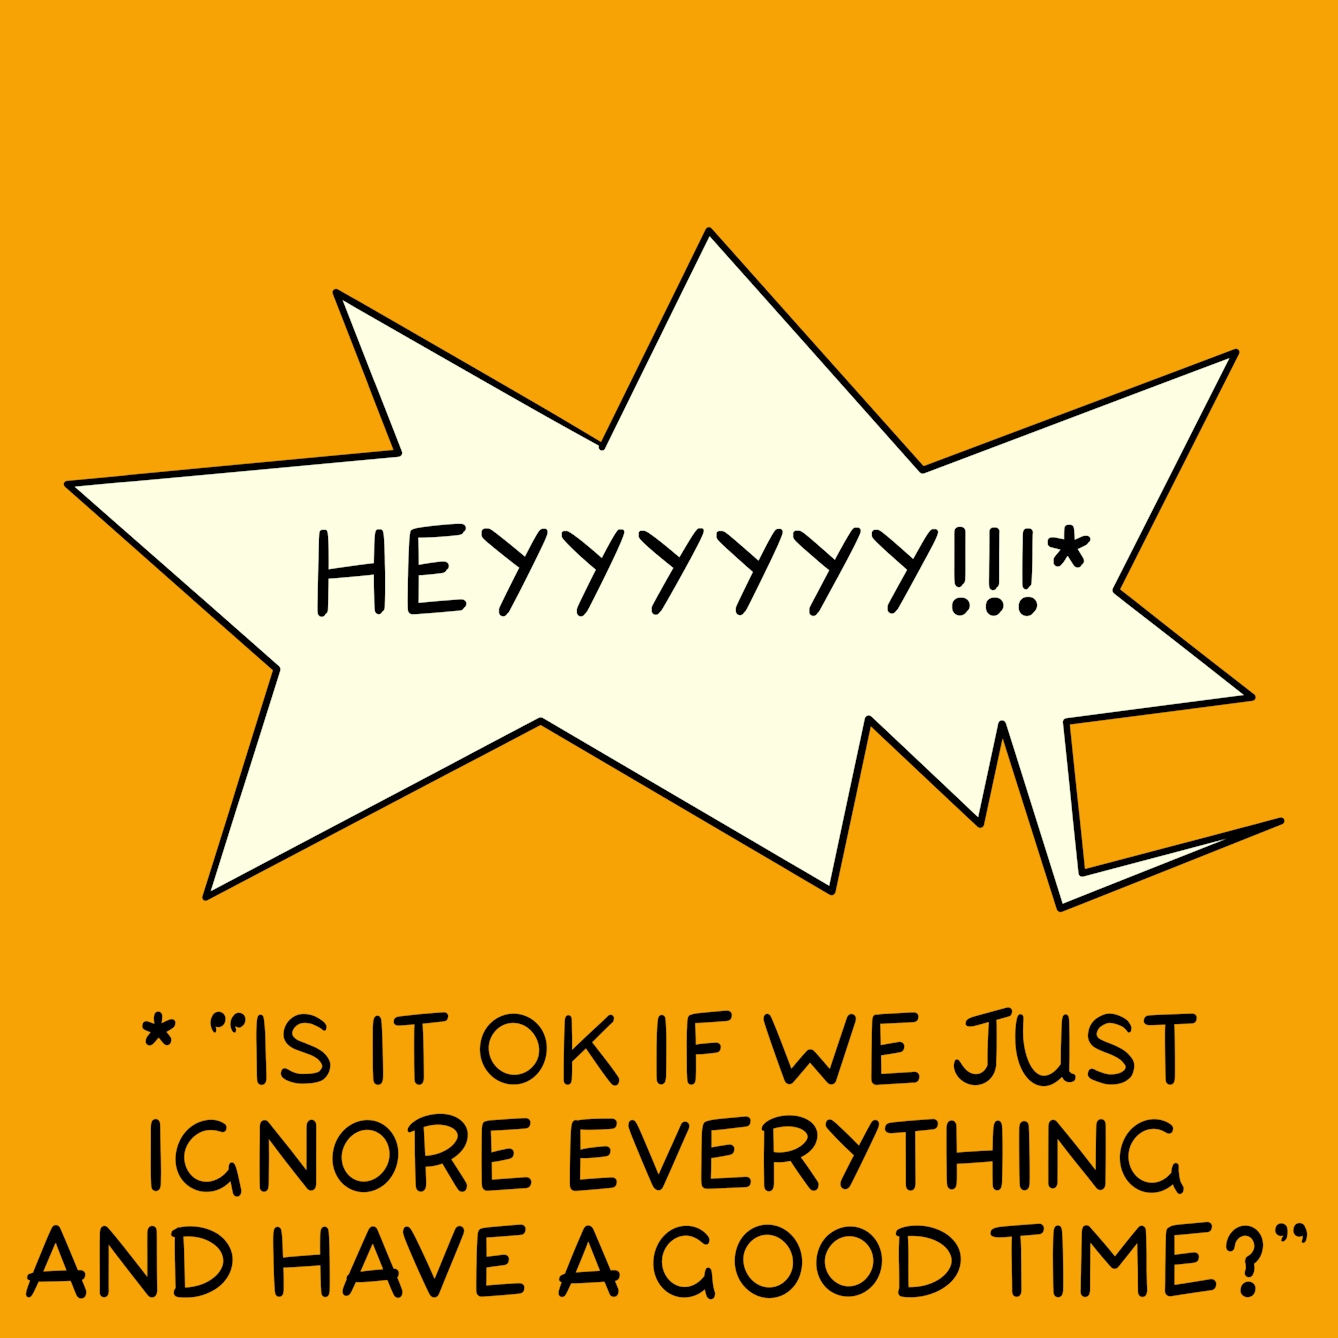 Panel 5 of a six-panel comic drawn digitally: Speech bubble reads "Heyyyyyy!!!*". The asterisk below says "Is it okay if we just ignore everything and have a good time?"